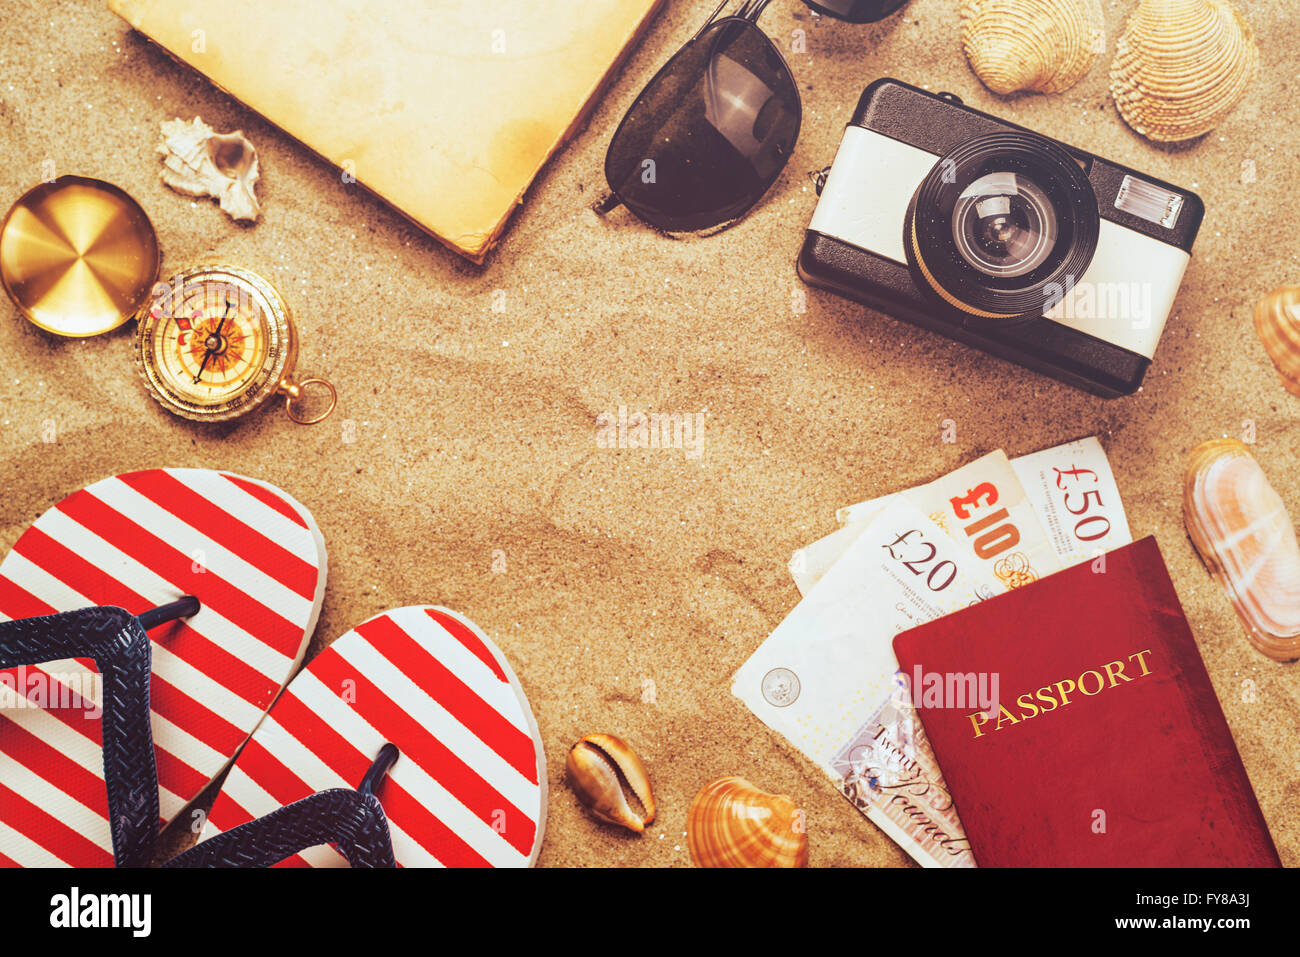 Summer vacation accessories on tropical sandy ocean beach, holidays abroad - summertime lifestyle objects Stock Photo